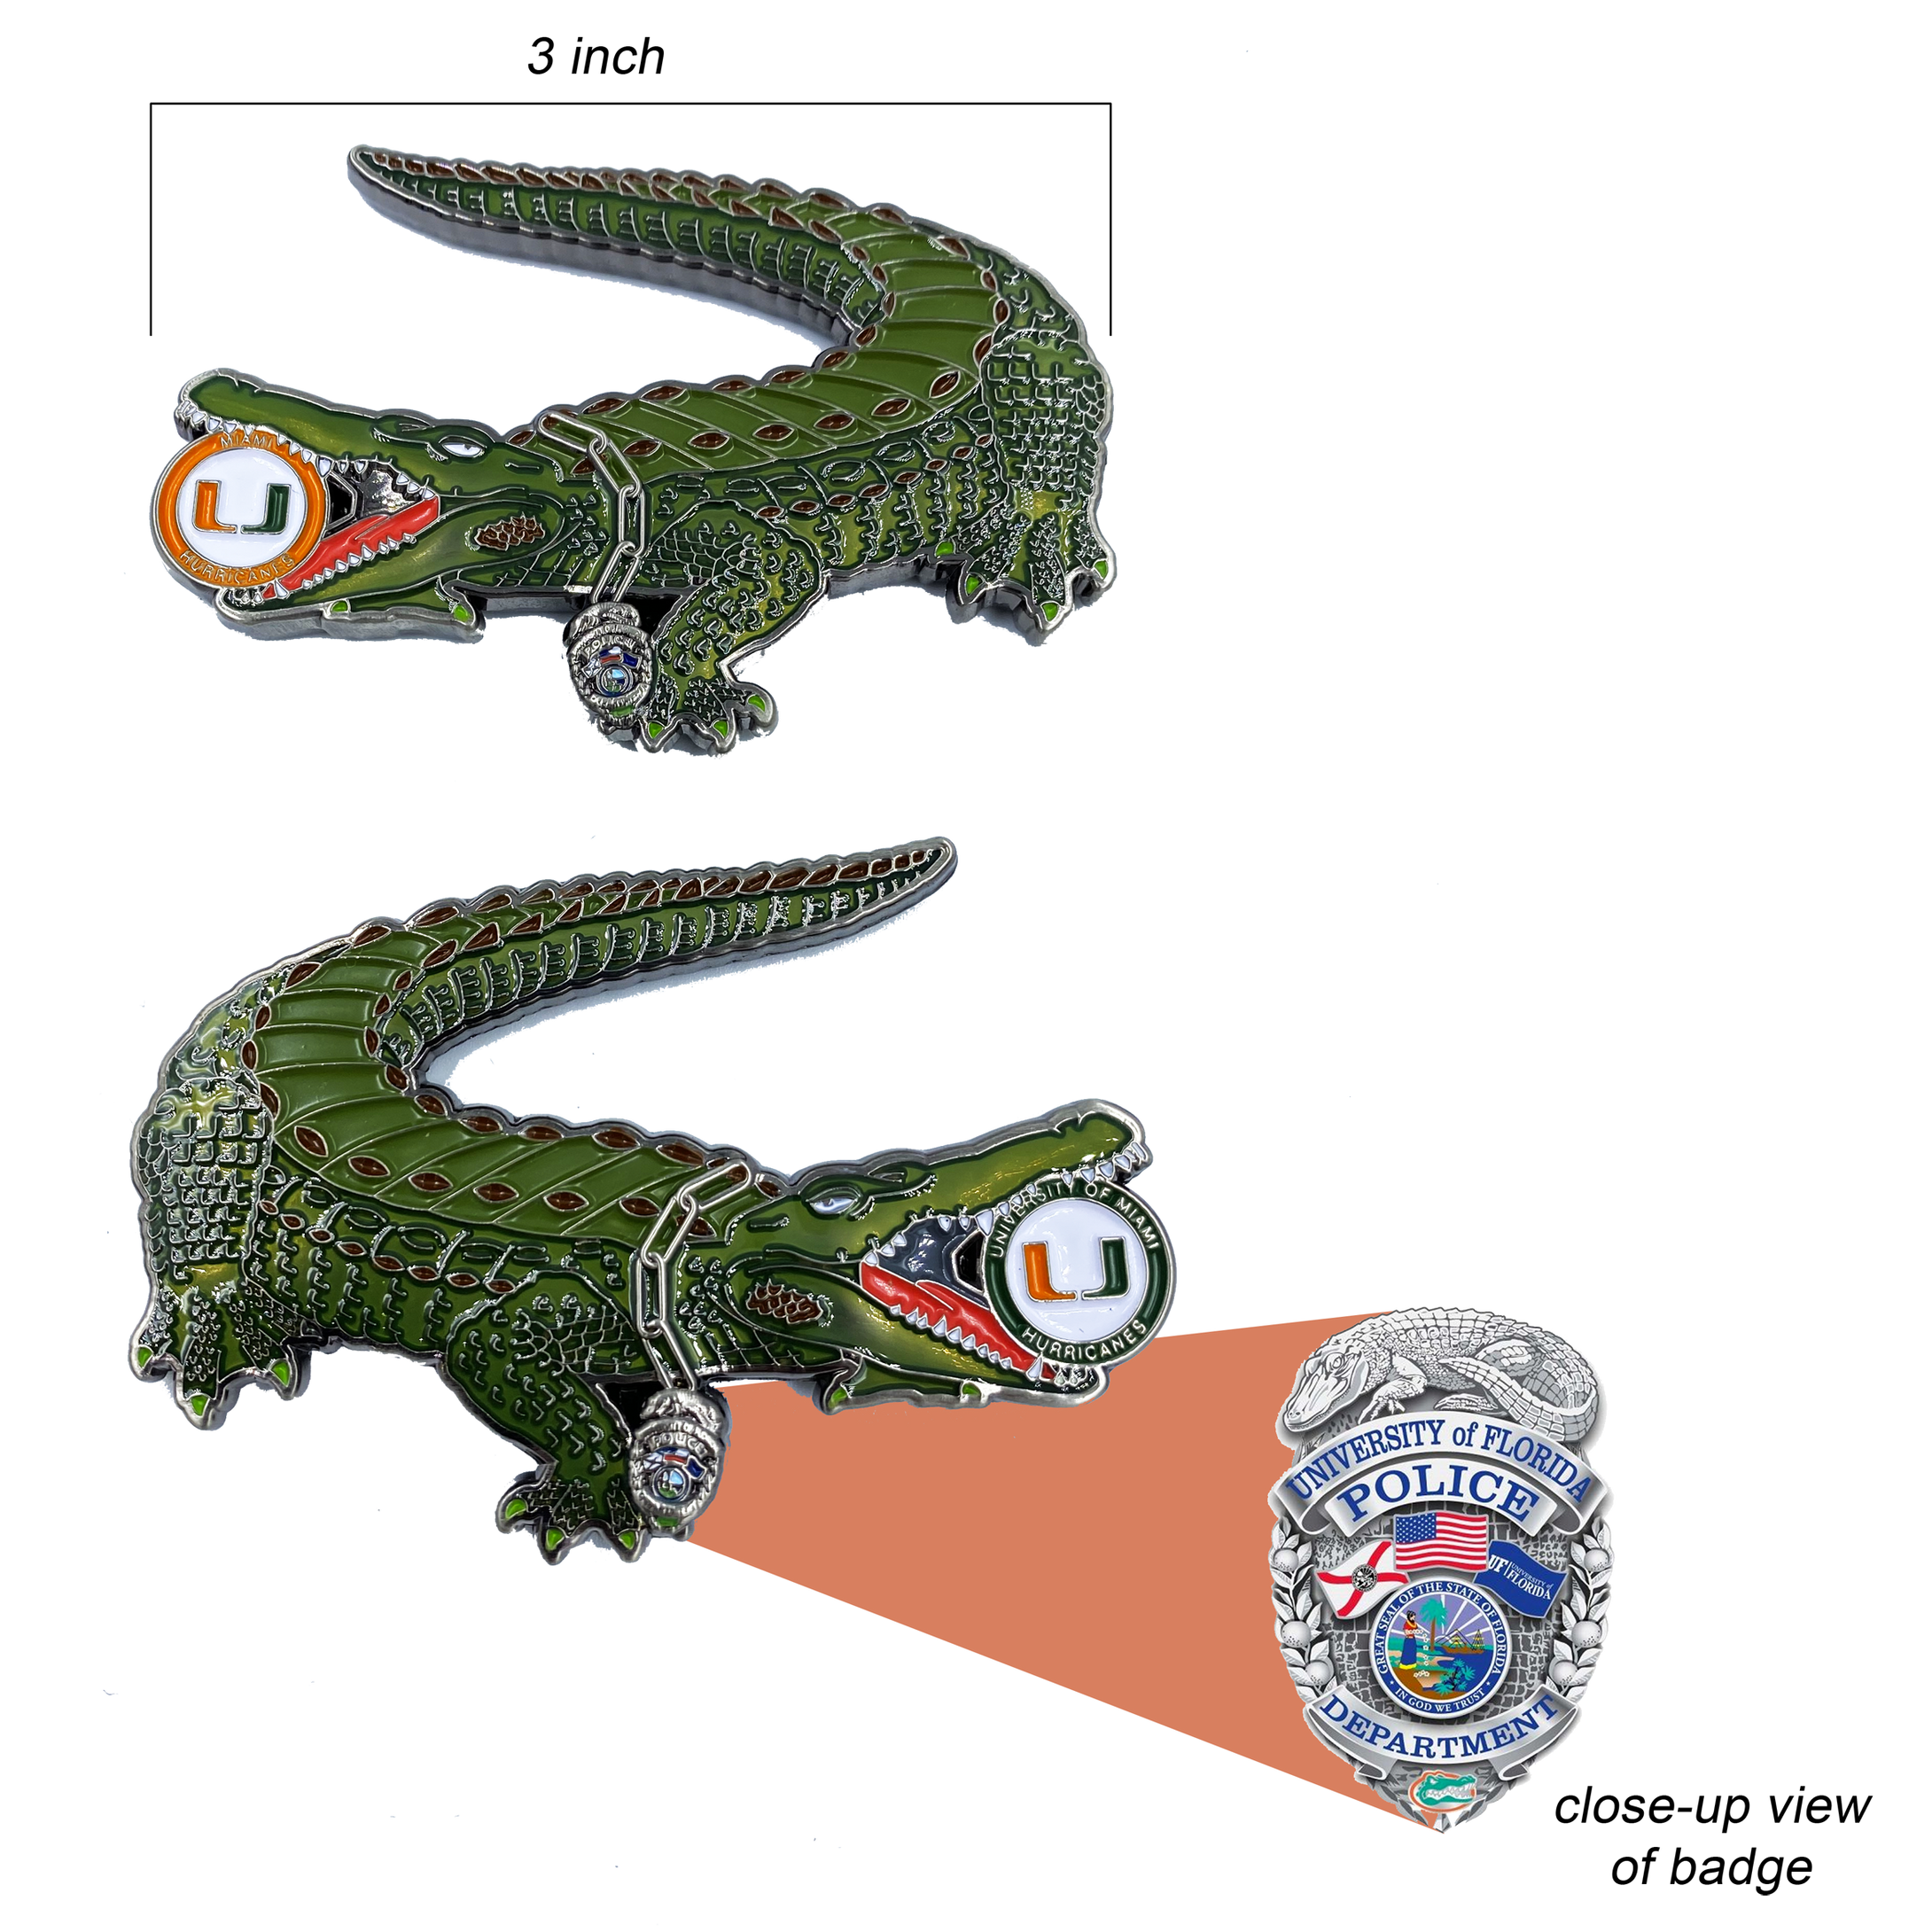 DISCONTINUED CL4-17 Florida Gators Challenge Coin Police   K9 UM Hurricanes University of Miami Canes